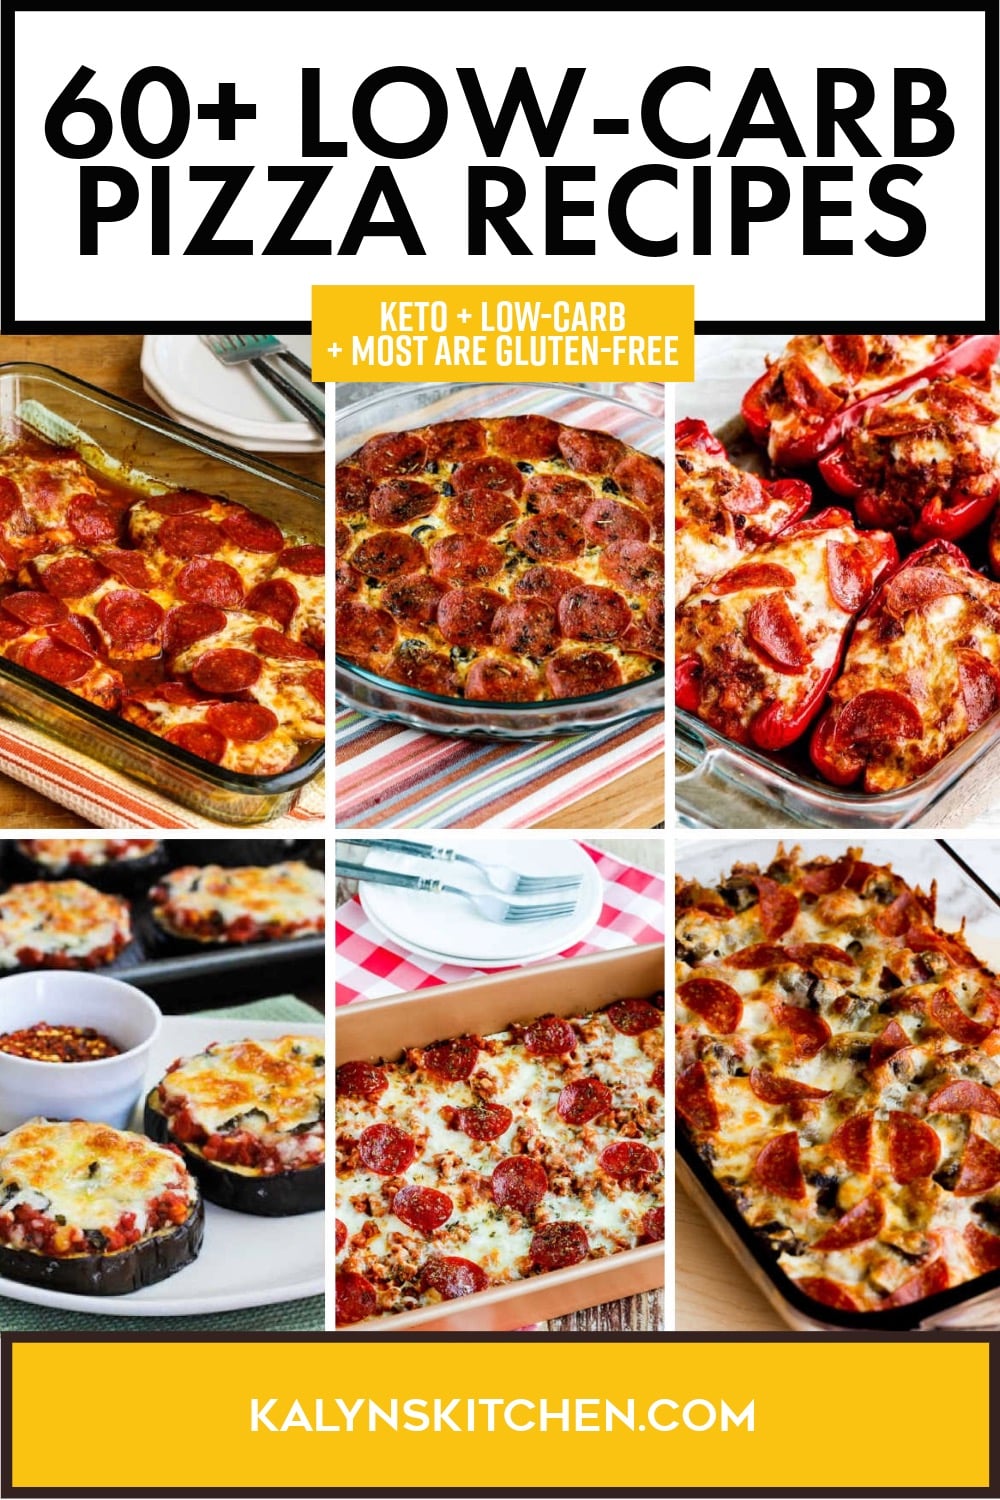 Pinterest image of 60+ Low-Carb Pizza Recipes